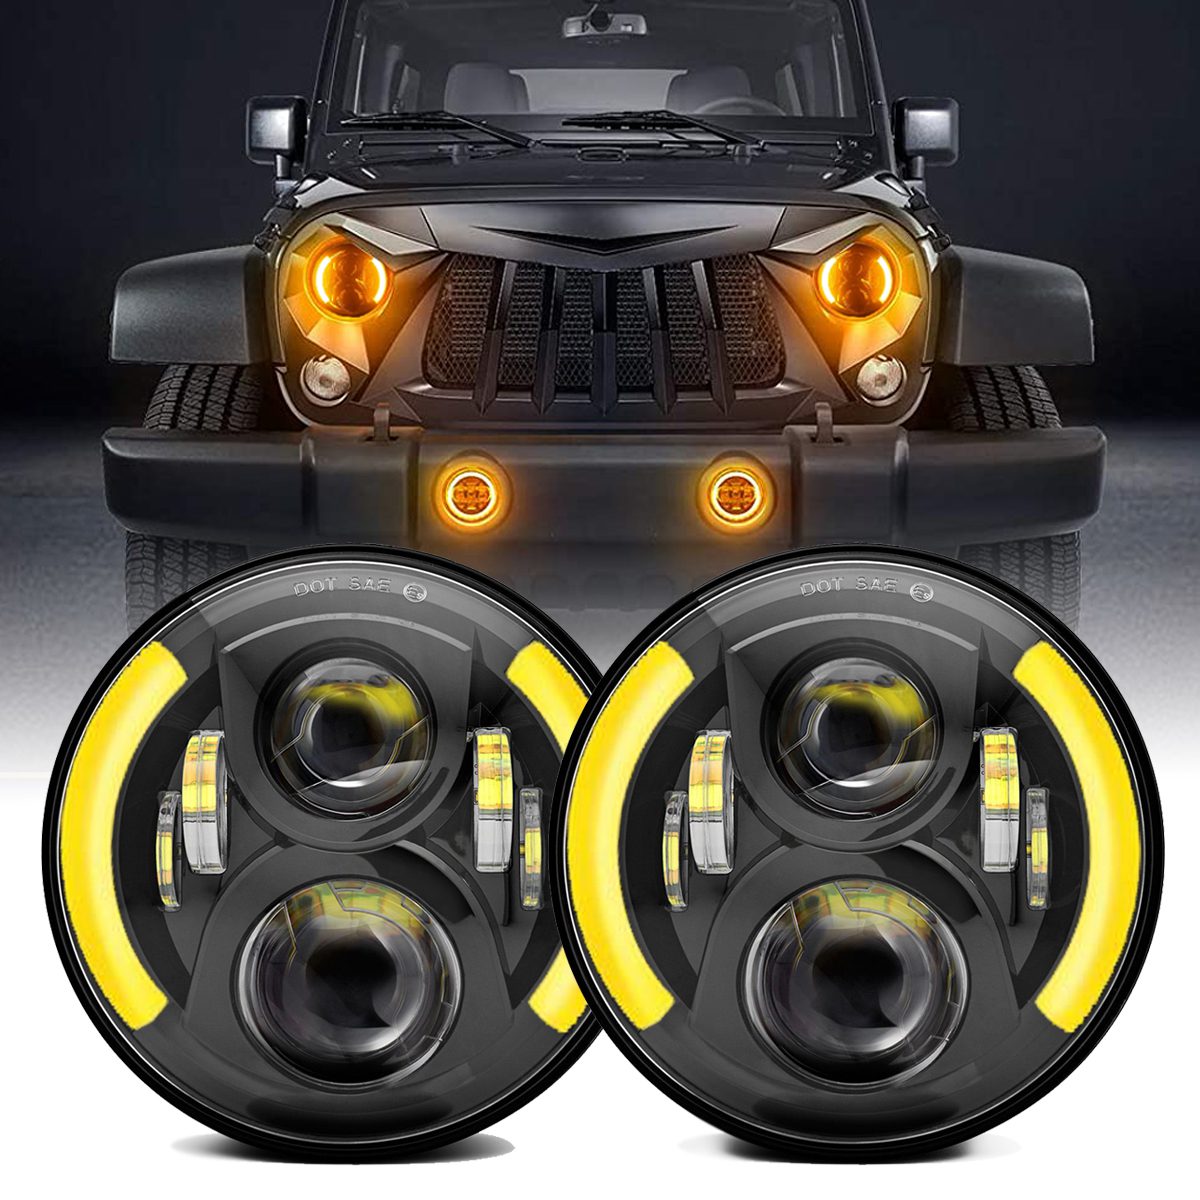 Partsam 7 H6024 High Low Beam White Halo Ring Angel Eyes DRL Pair DOT Approved 7 Inch Round LED Headlights Amber Turning Signal Lights Compatible with Jeep Wrangler JK TJ CJ/Hummer H2 H1 